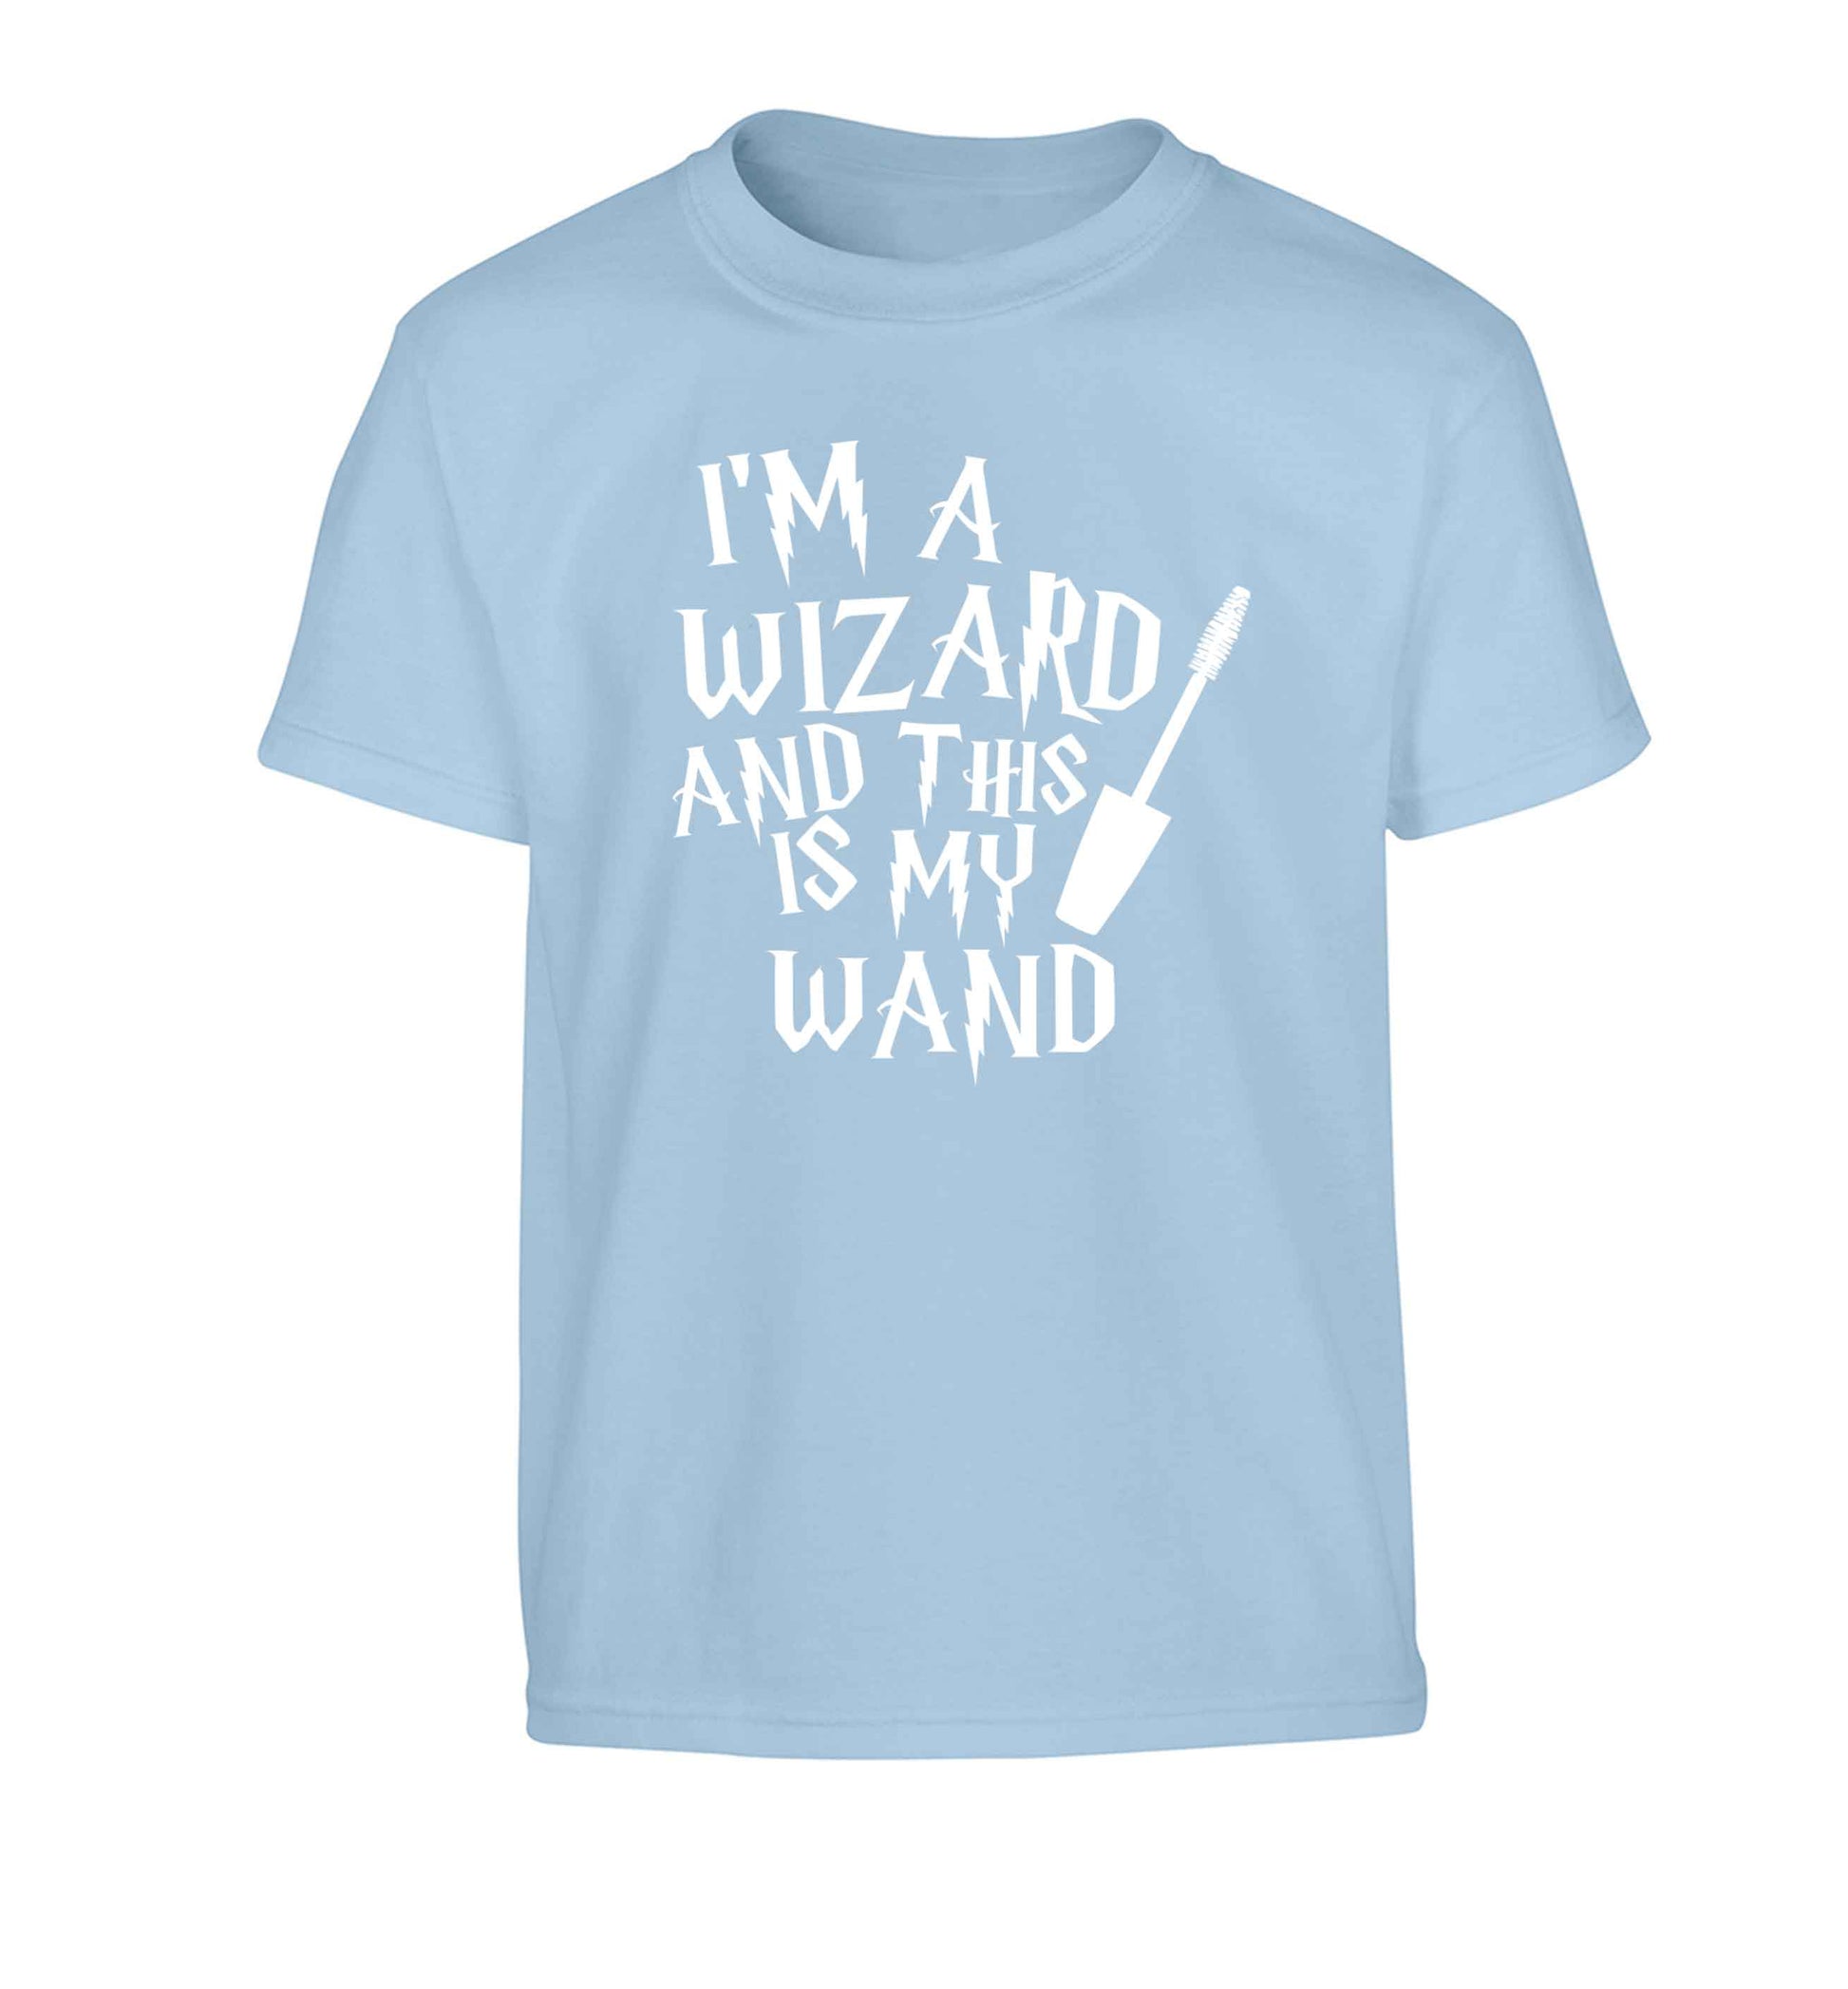 I'm a wizard and this is my wand Children's light blue Tshirt 12-13 Years